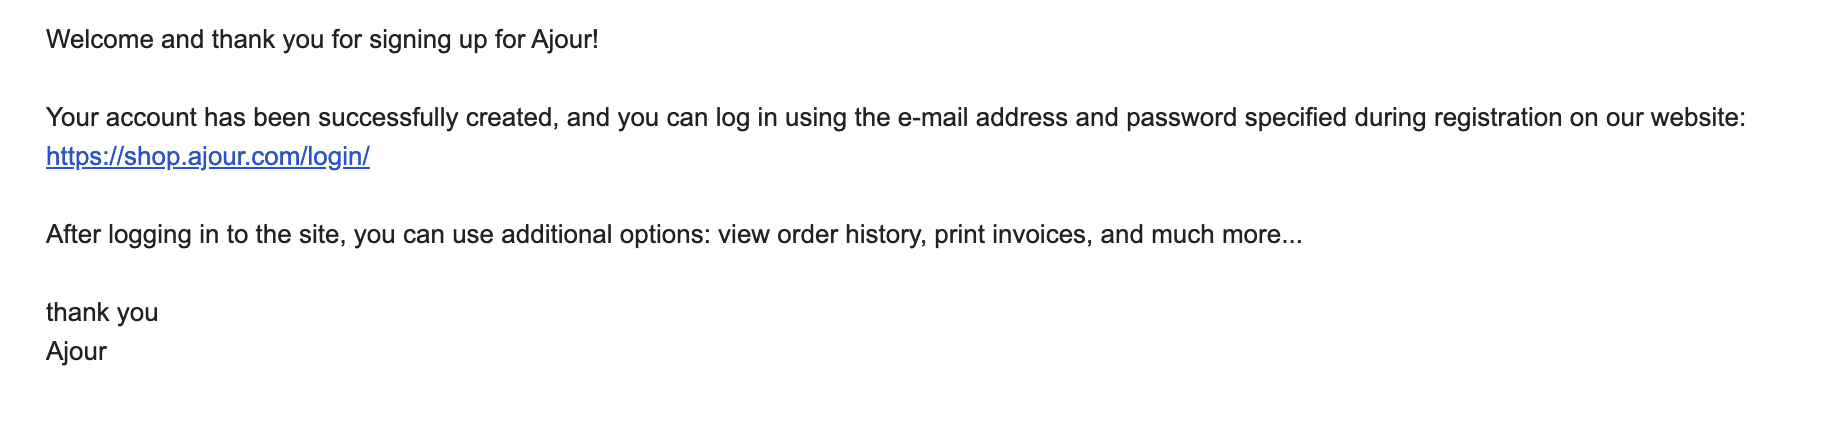 Example of plain text email